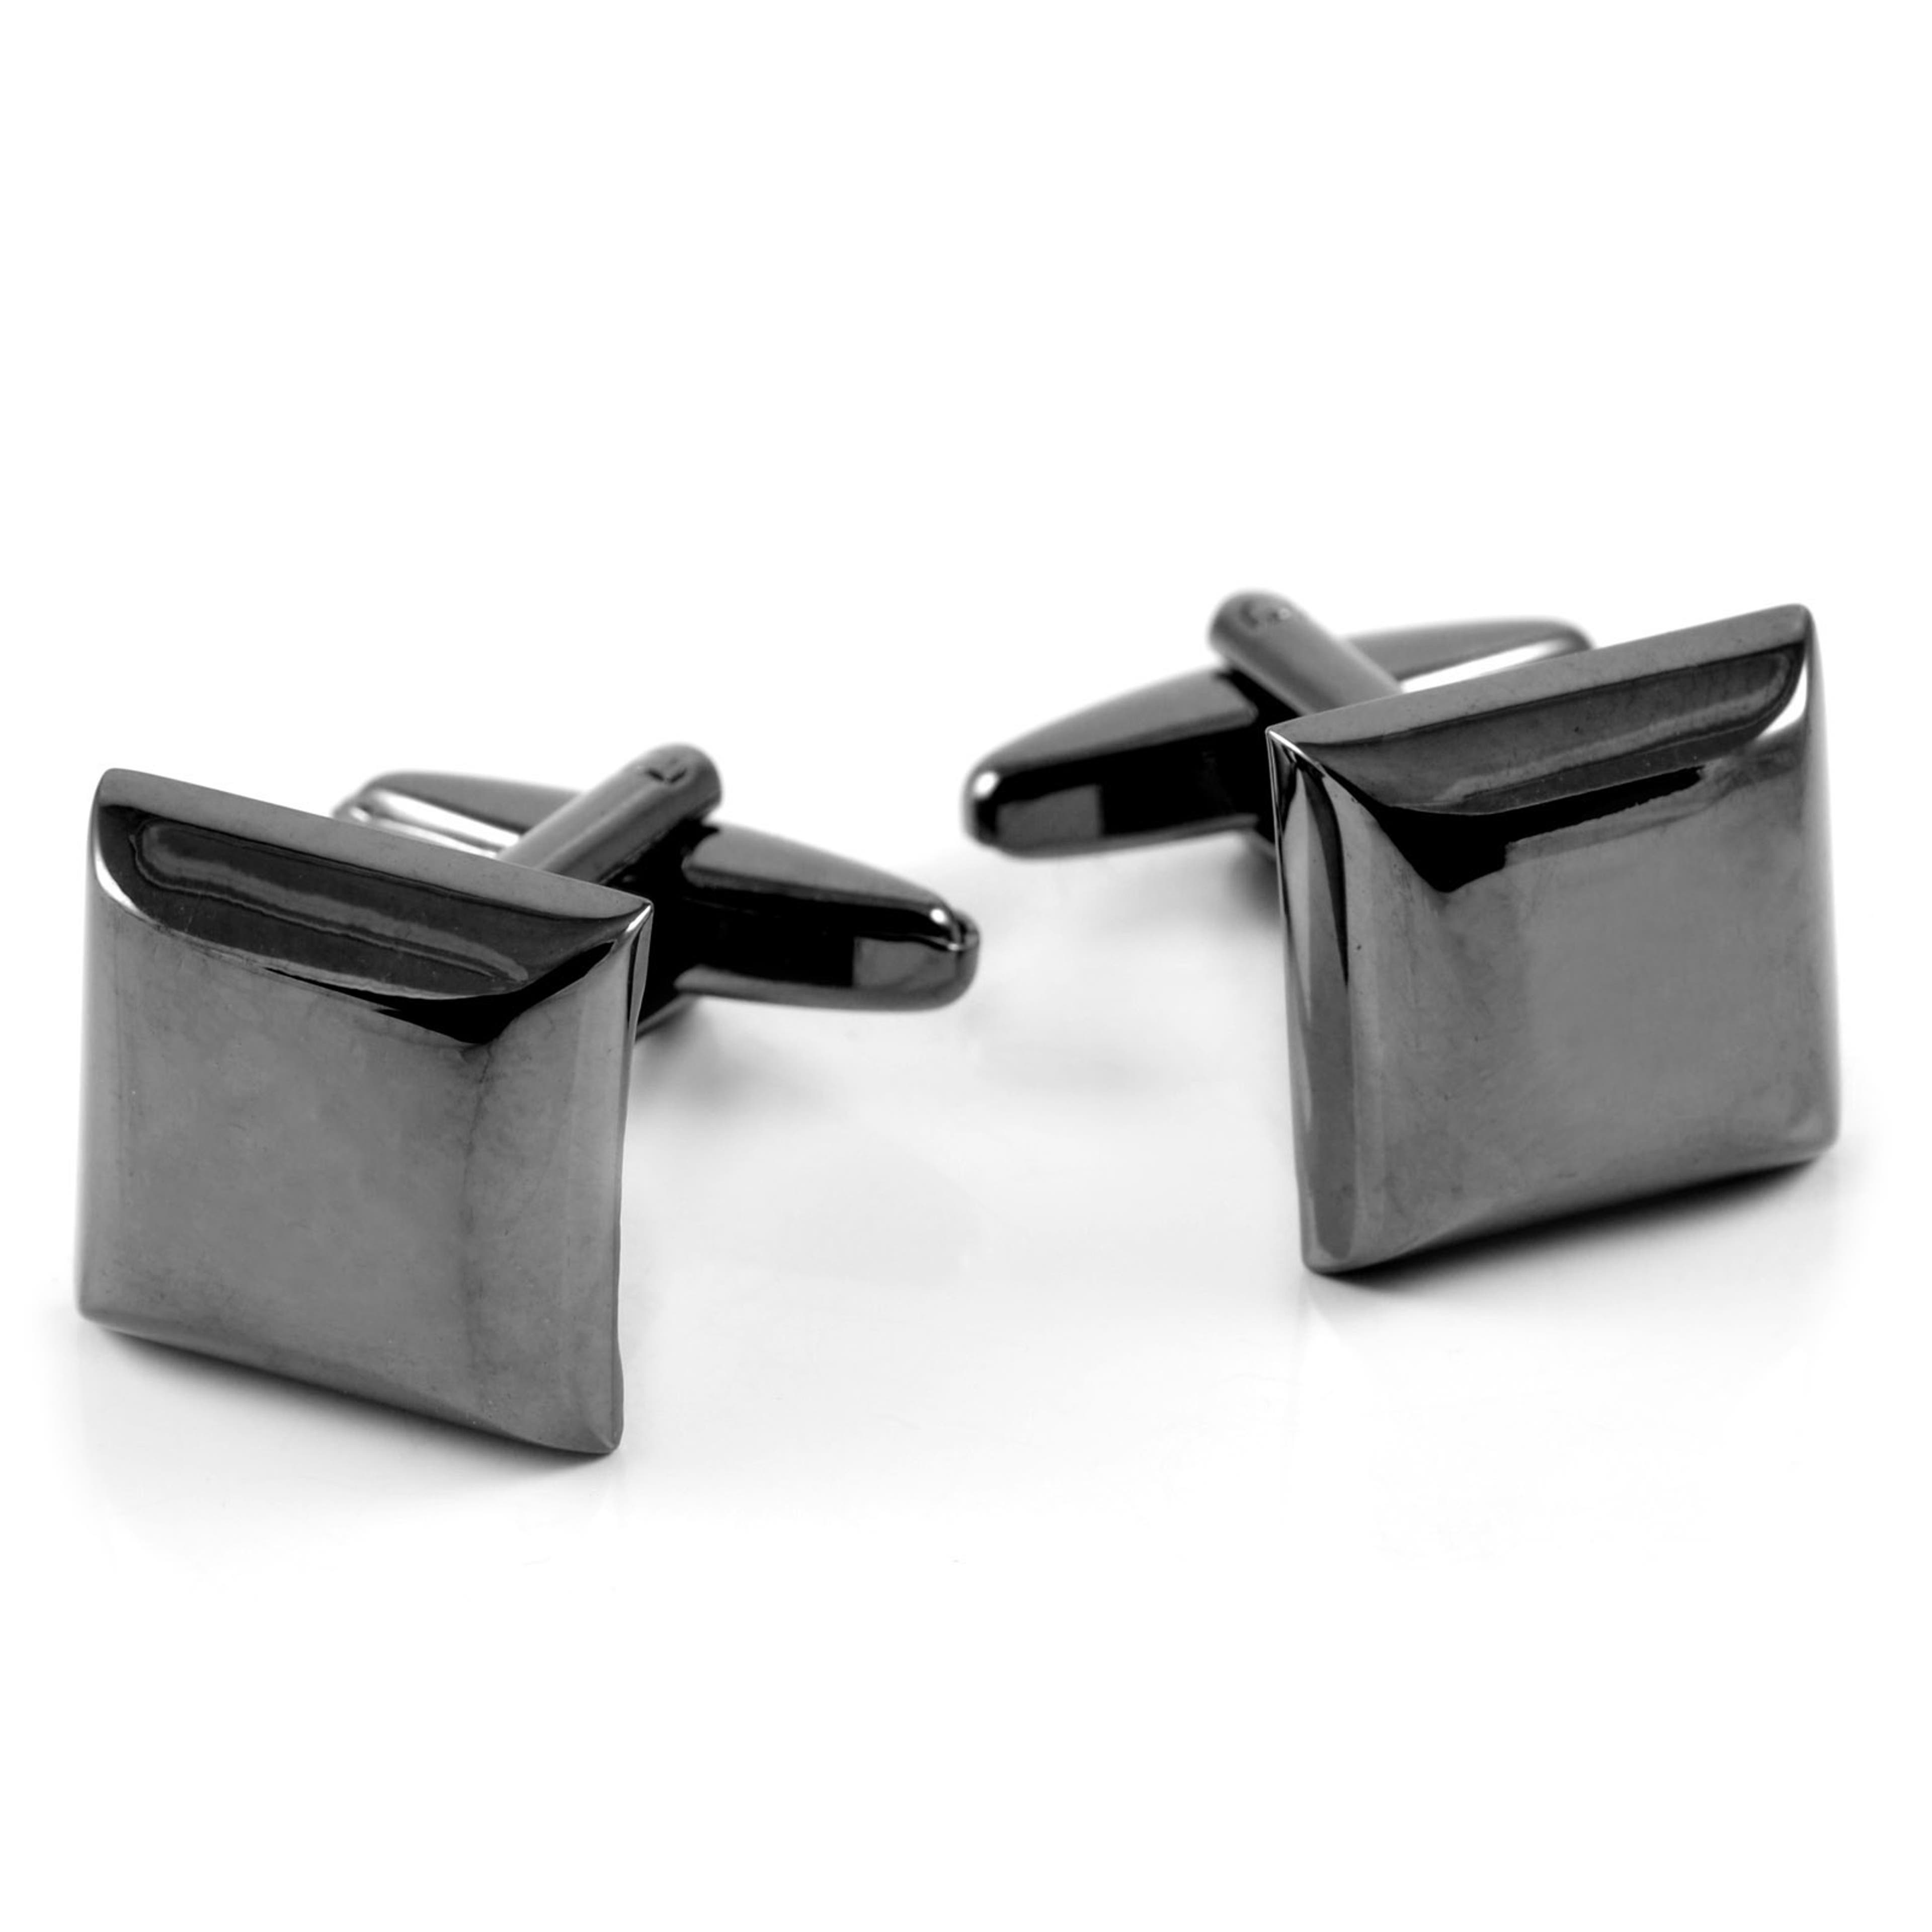 Black Rounded Square Cufflinks